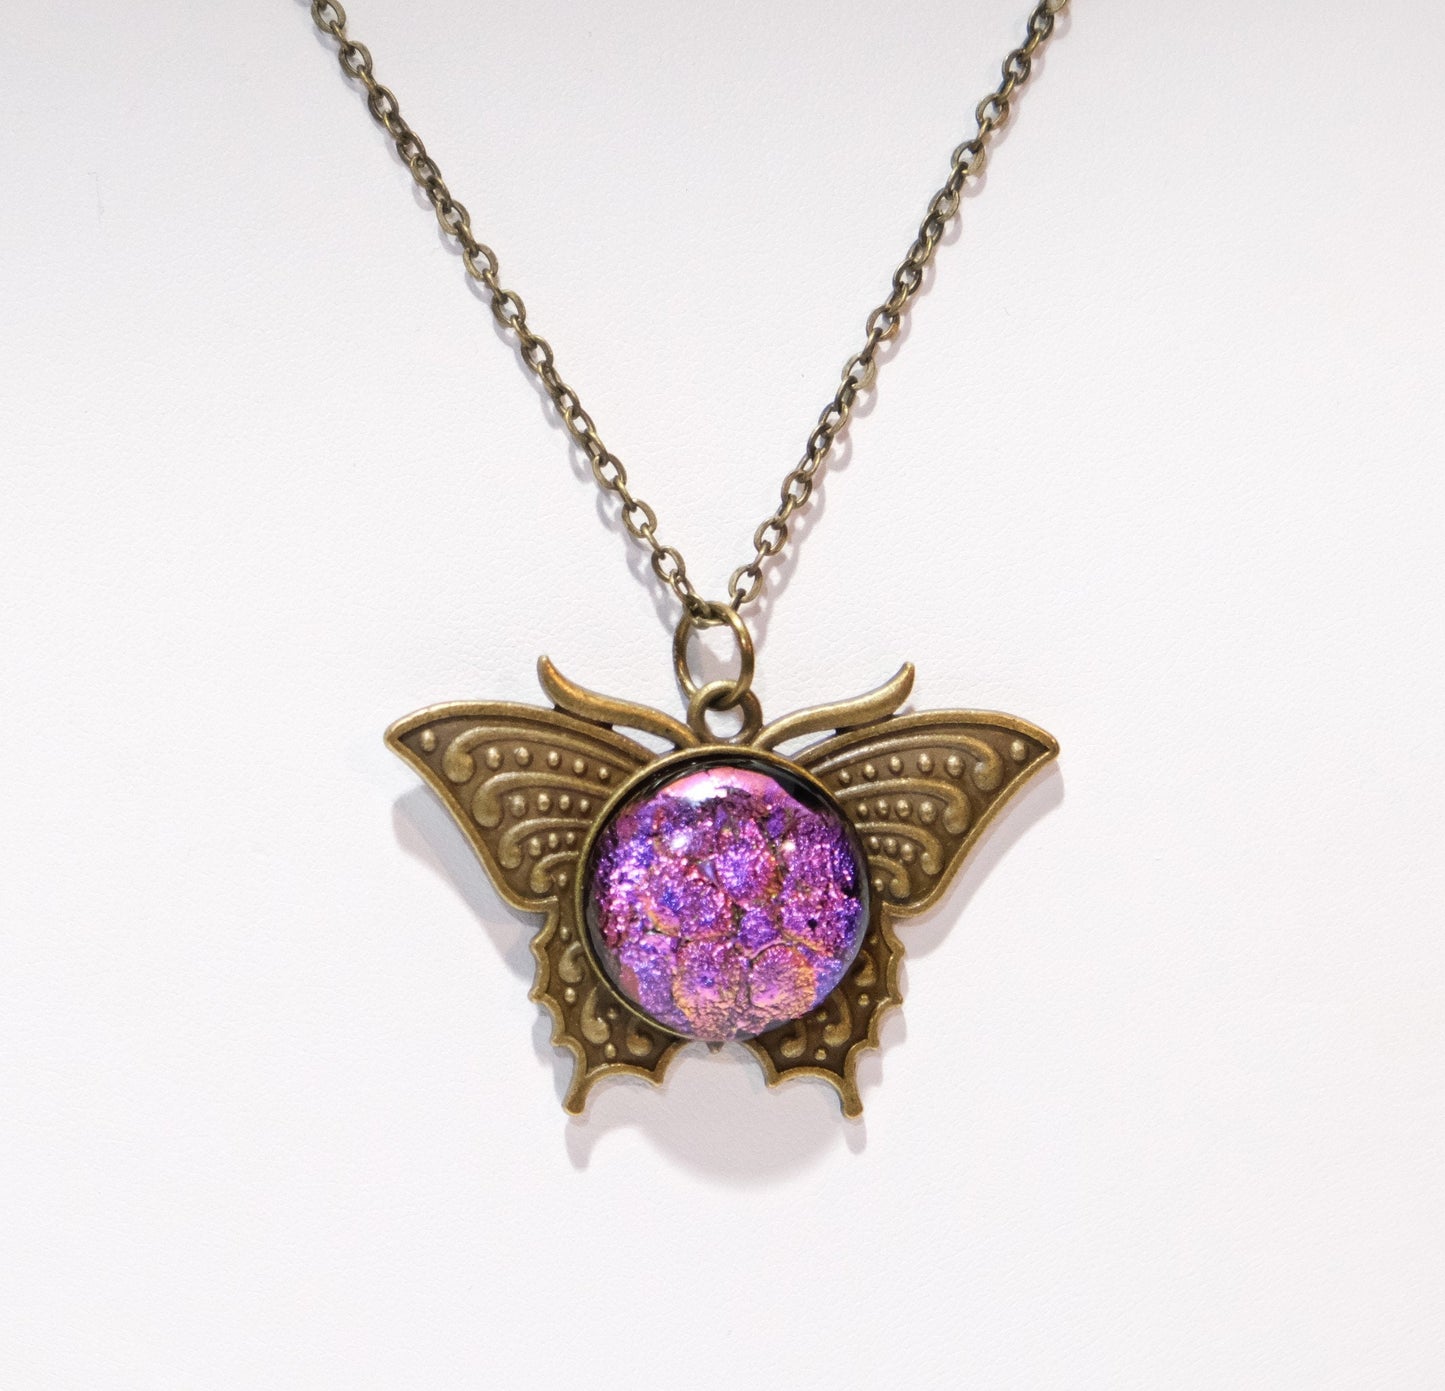 Butterfly pendant necklace, brass tone with dark purple dichroic fused glass center stone on a 20 inch brass tone chain